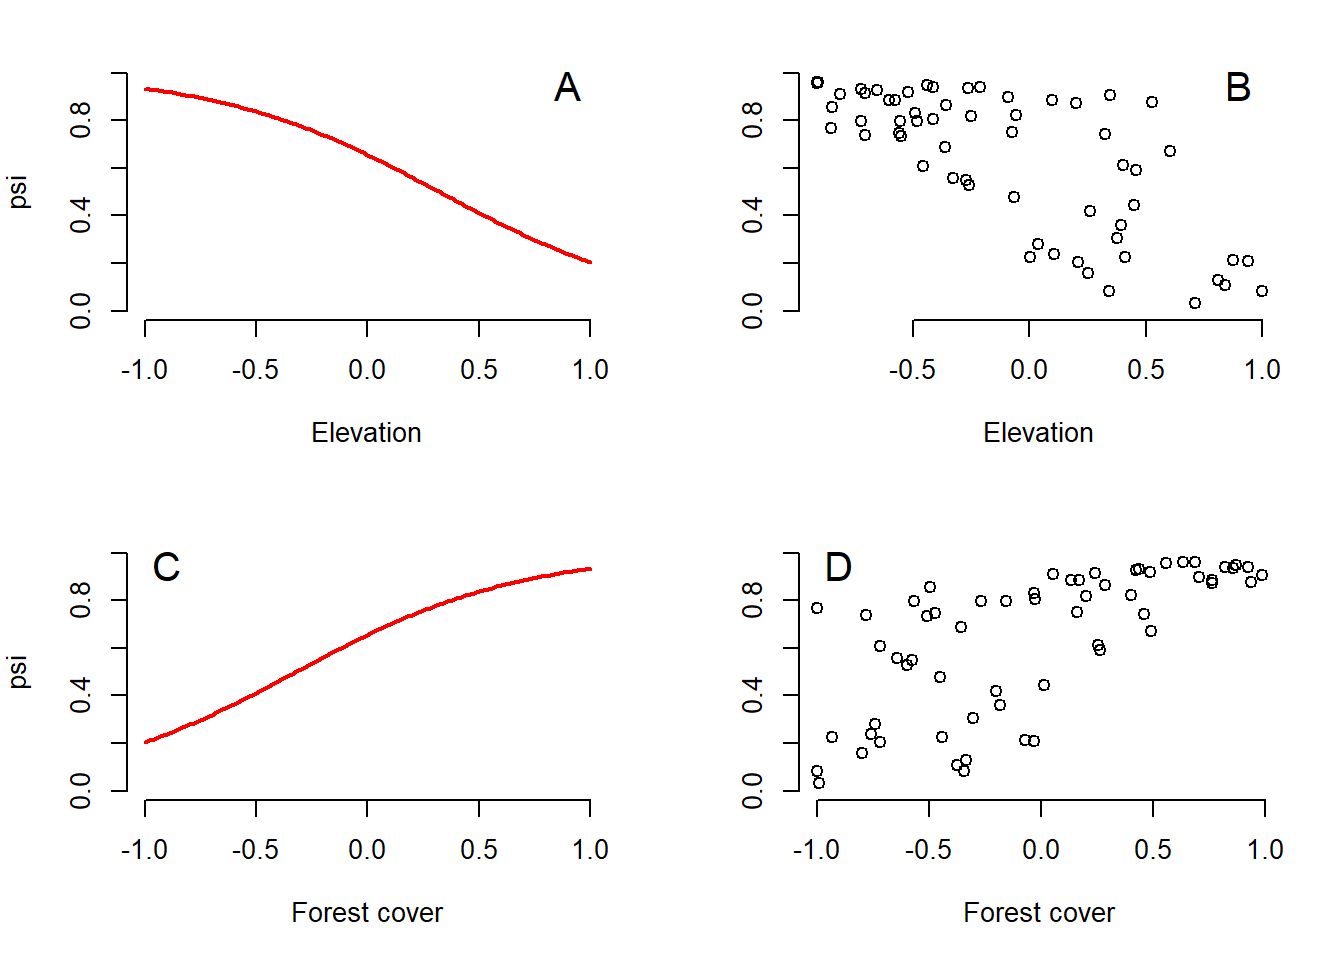 Two ways to show the relationship between the probability of occurrence of tapir and the covariates. (A) Relationship between psi and elevation for a constant value (mean equal to zero) of forest cover. (B) Relationship between psi and elevation in an observed value of forest cover. (C) Forest cover psi ratio for a constant elevation (at mean zero). (D) Relationship psi forest cover for the observed value of elevation.